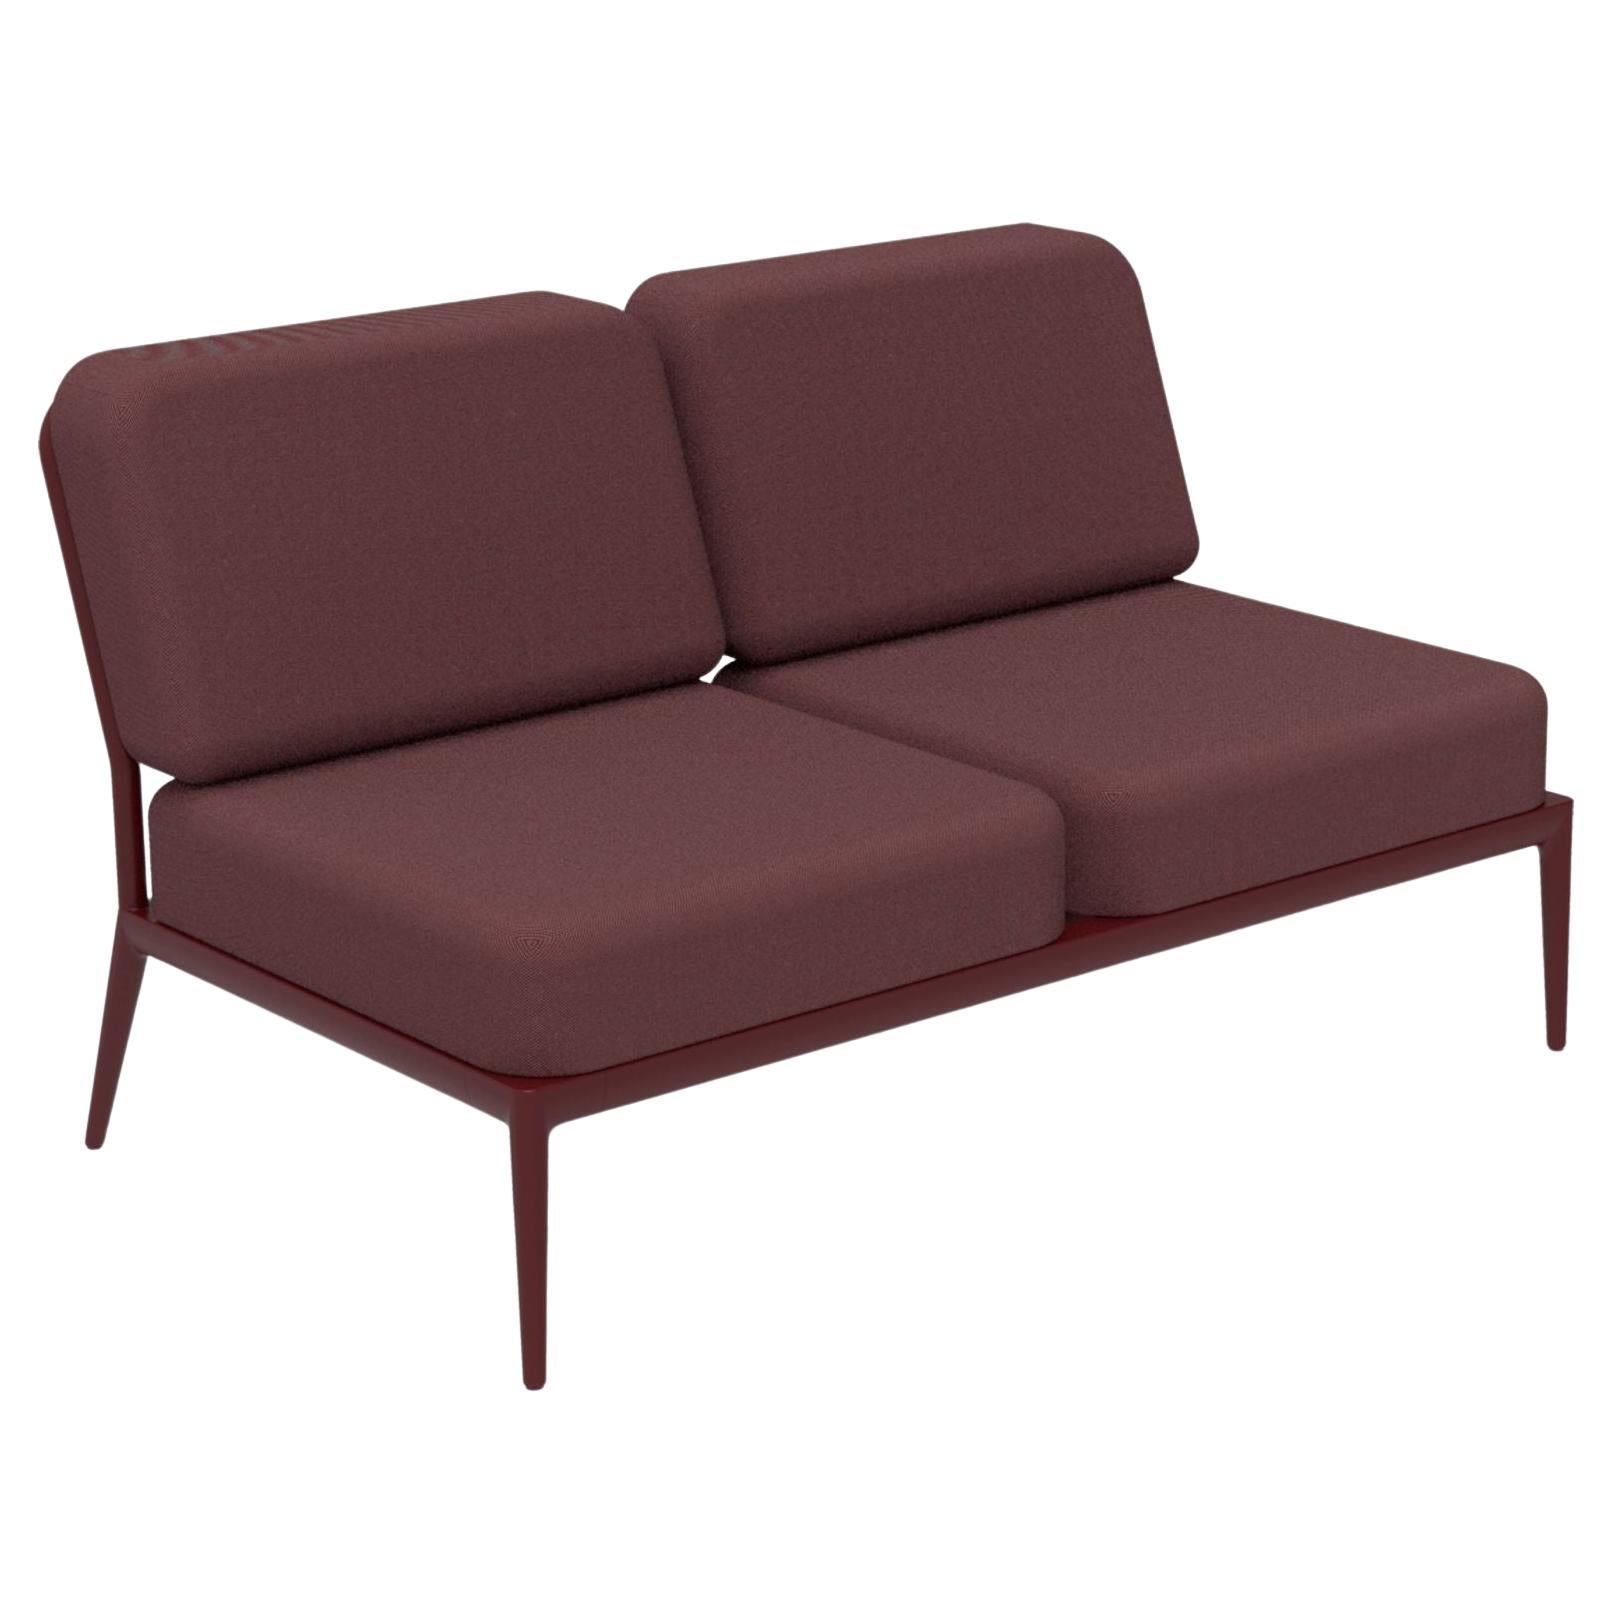 Nature Burgundy Double Central Modular Sofa by MOWEE For Sale